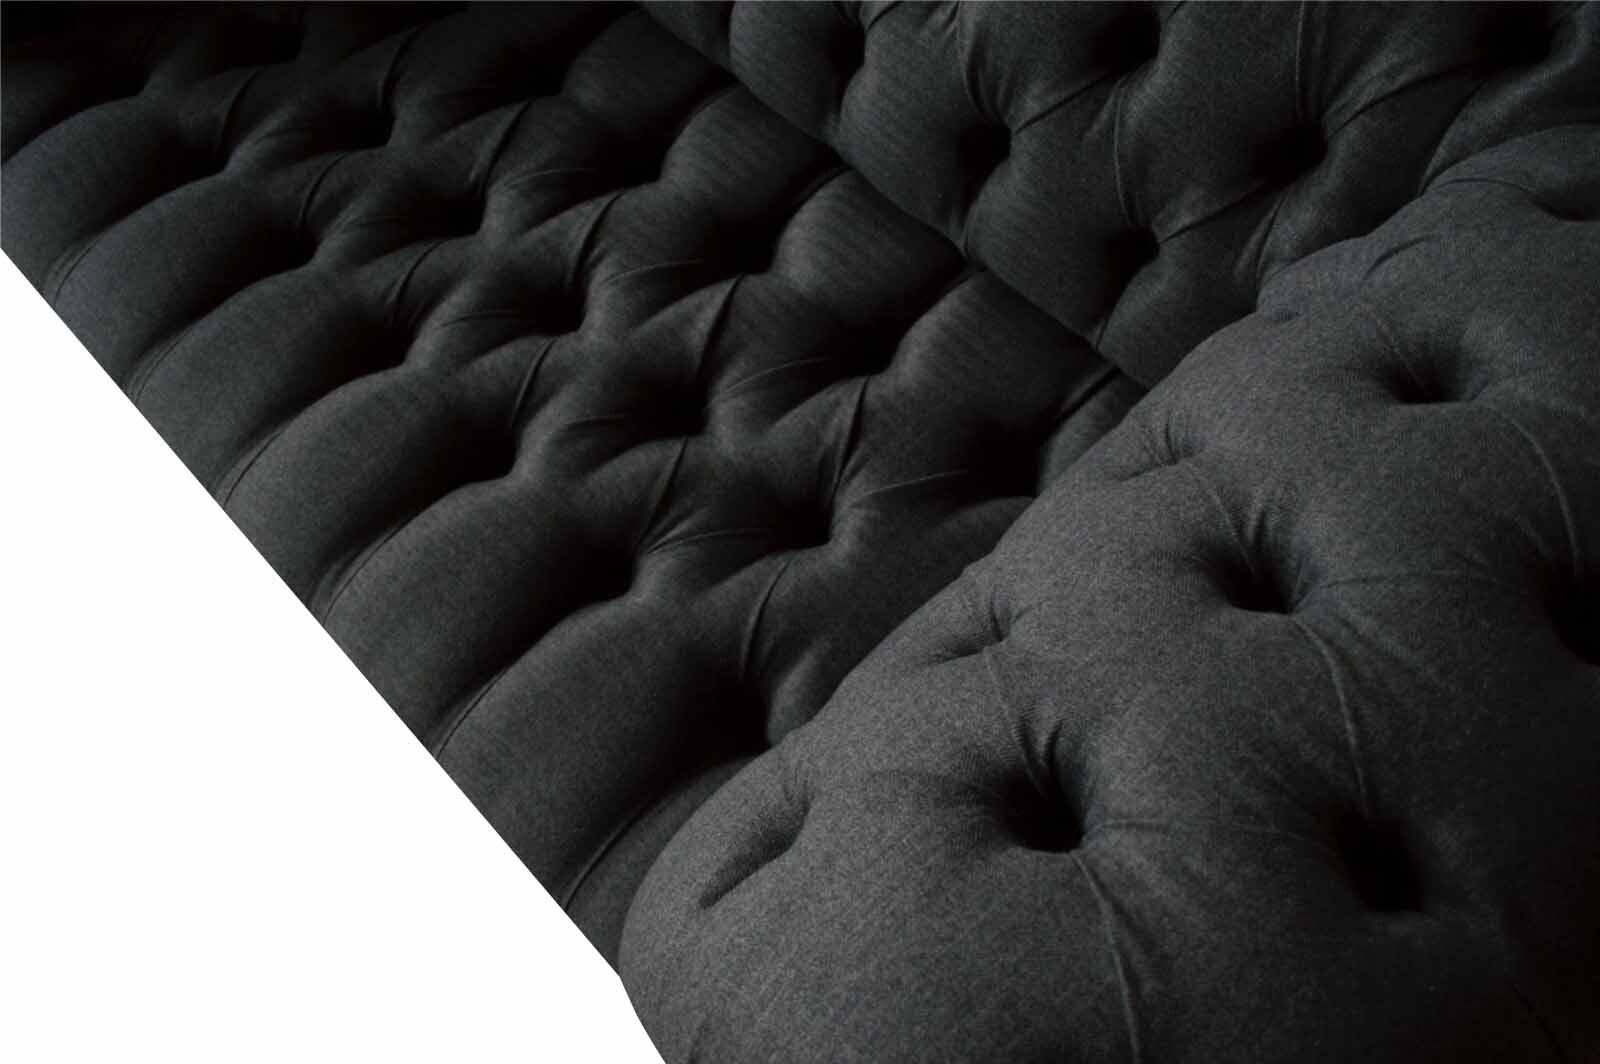 JVmoebel Sofa Design Stoff Neu, 2 Stoff Chesterfield Made Sitzer Sofa Europe Polster Couch Textil In